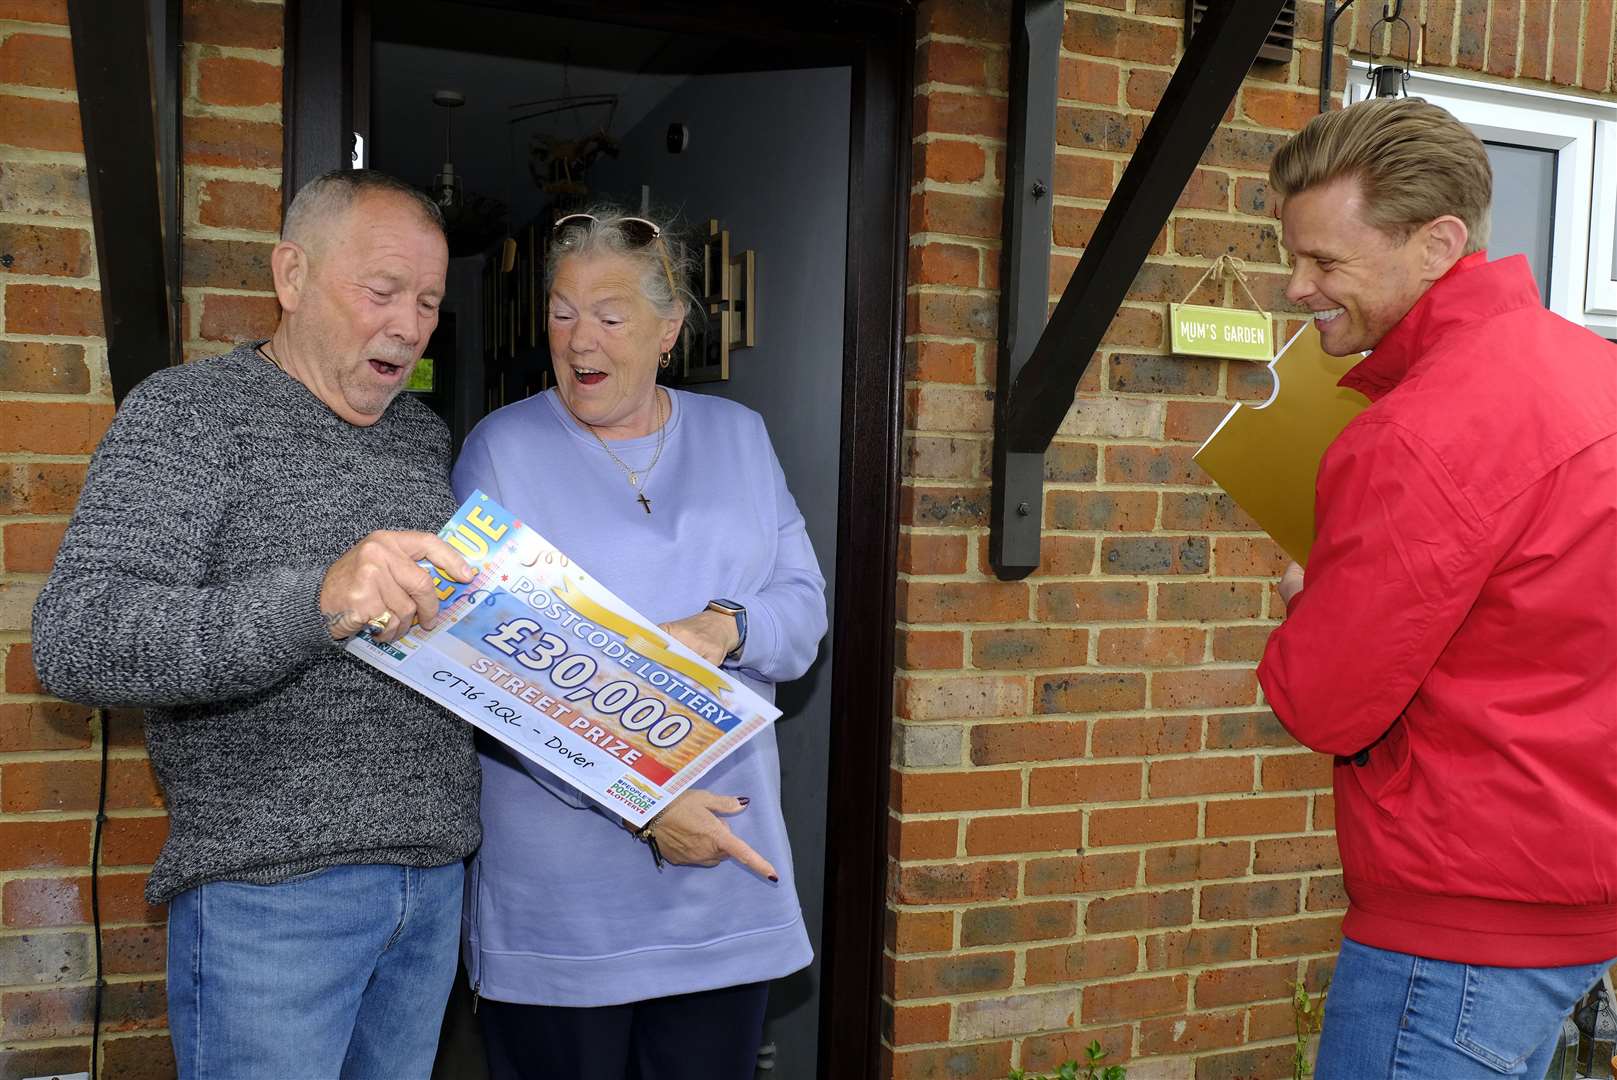 Roddy Hayward and wife Karen were surprised by Jeff Brazier. Picture: People’s Postcode Lottery